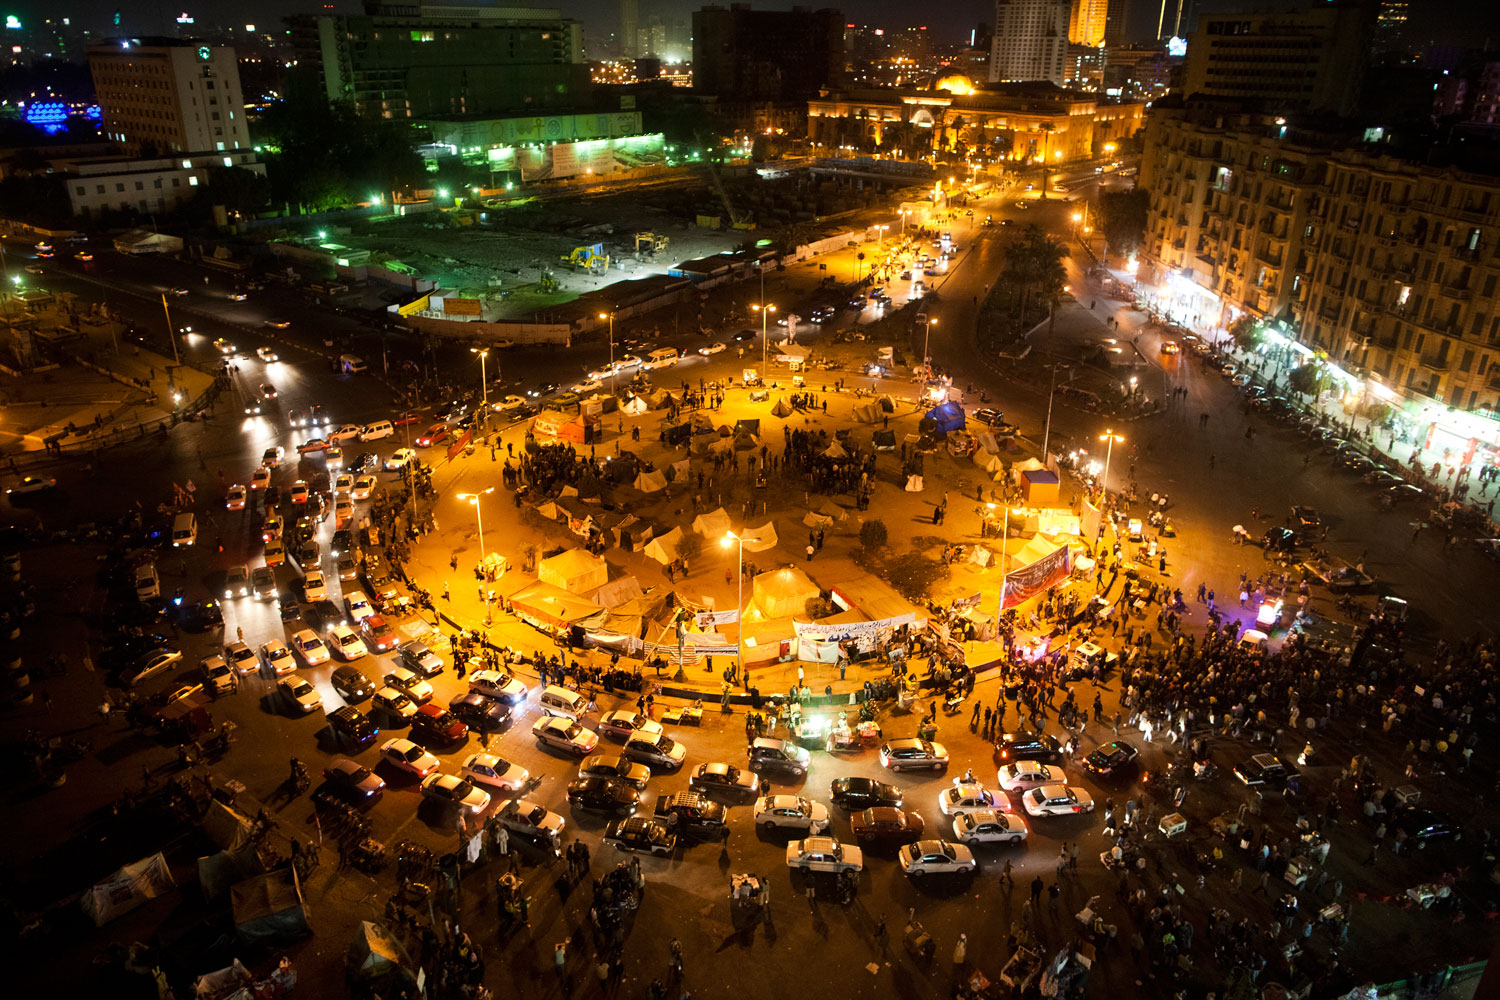 A view of Tahrir Square with a small number of protesters, street vendors and cars, on the one-year anniversary of—and at approximately the same time as—when President Mubarak stepped down.